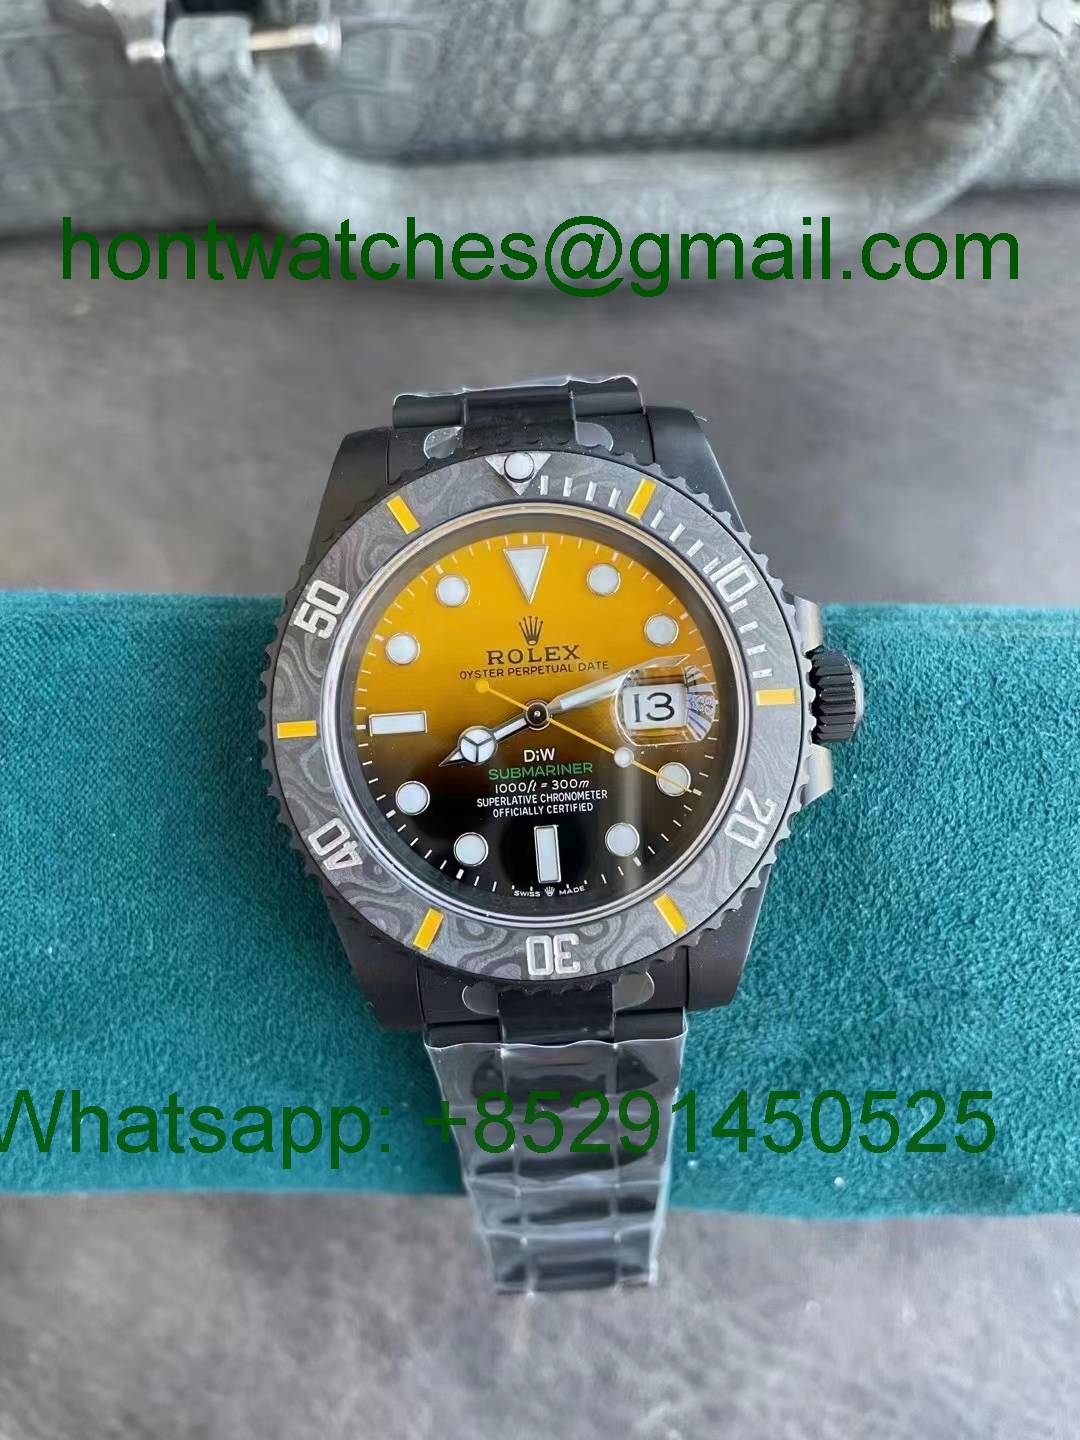 Replica Rolex Submariner DiW Yellow Dial VSF 1:1 Best VS3135 DLC - Hontwatch Wholesale 